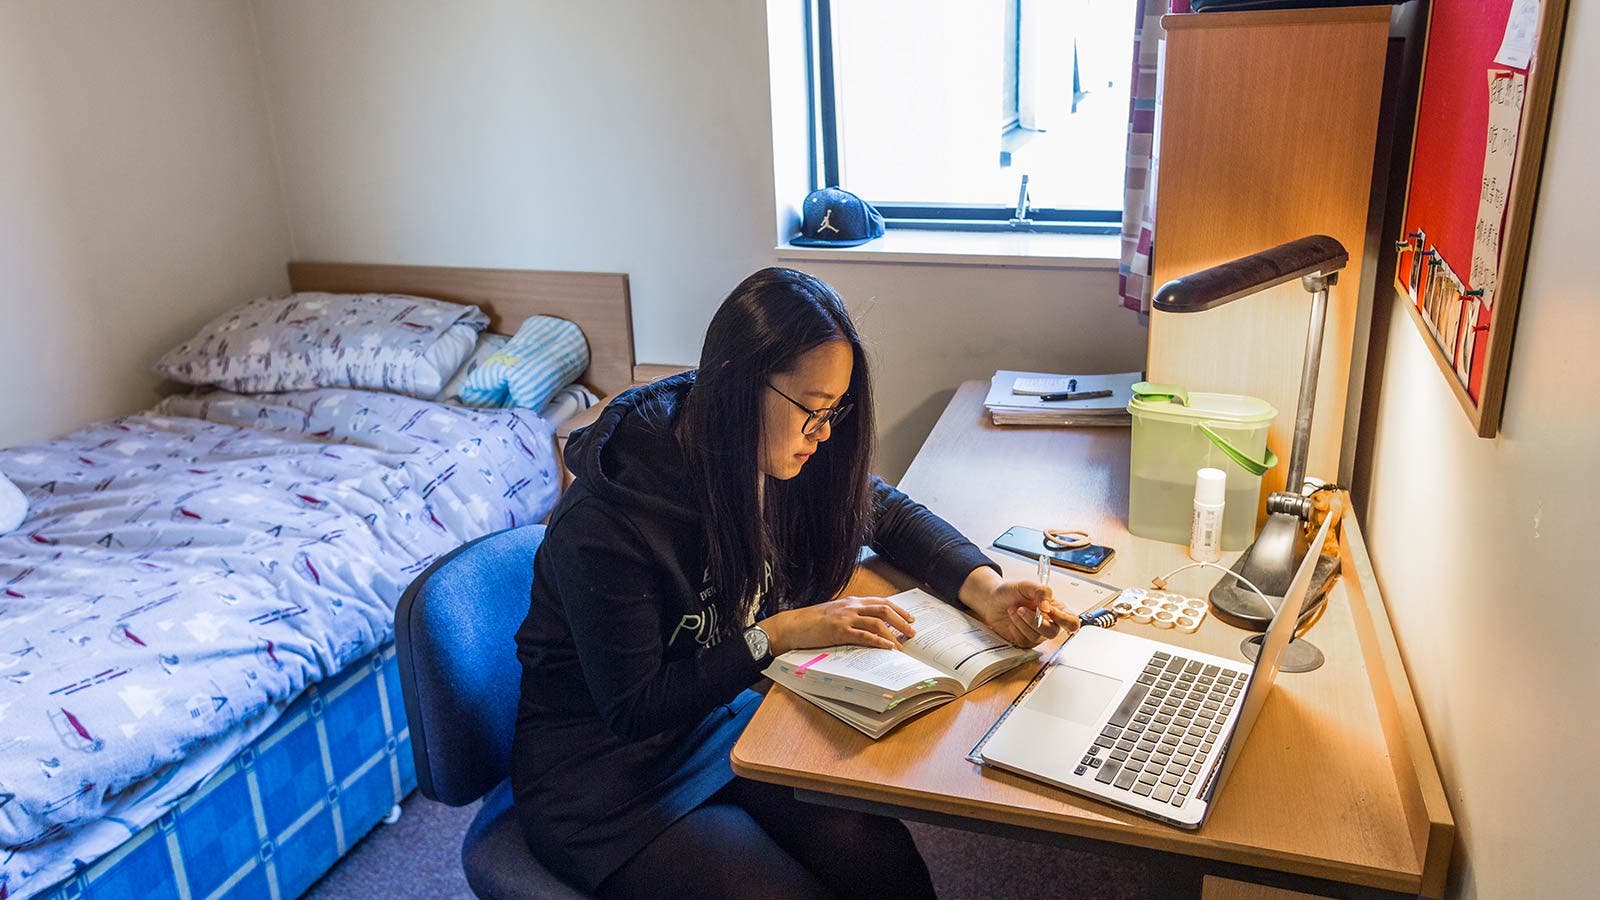 Student studying at bedroom desk in accommodation